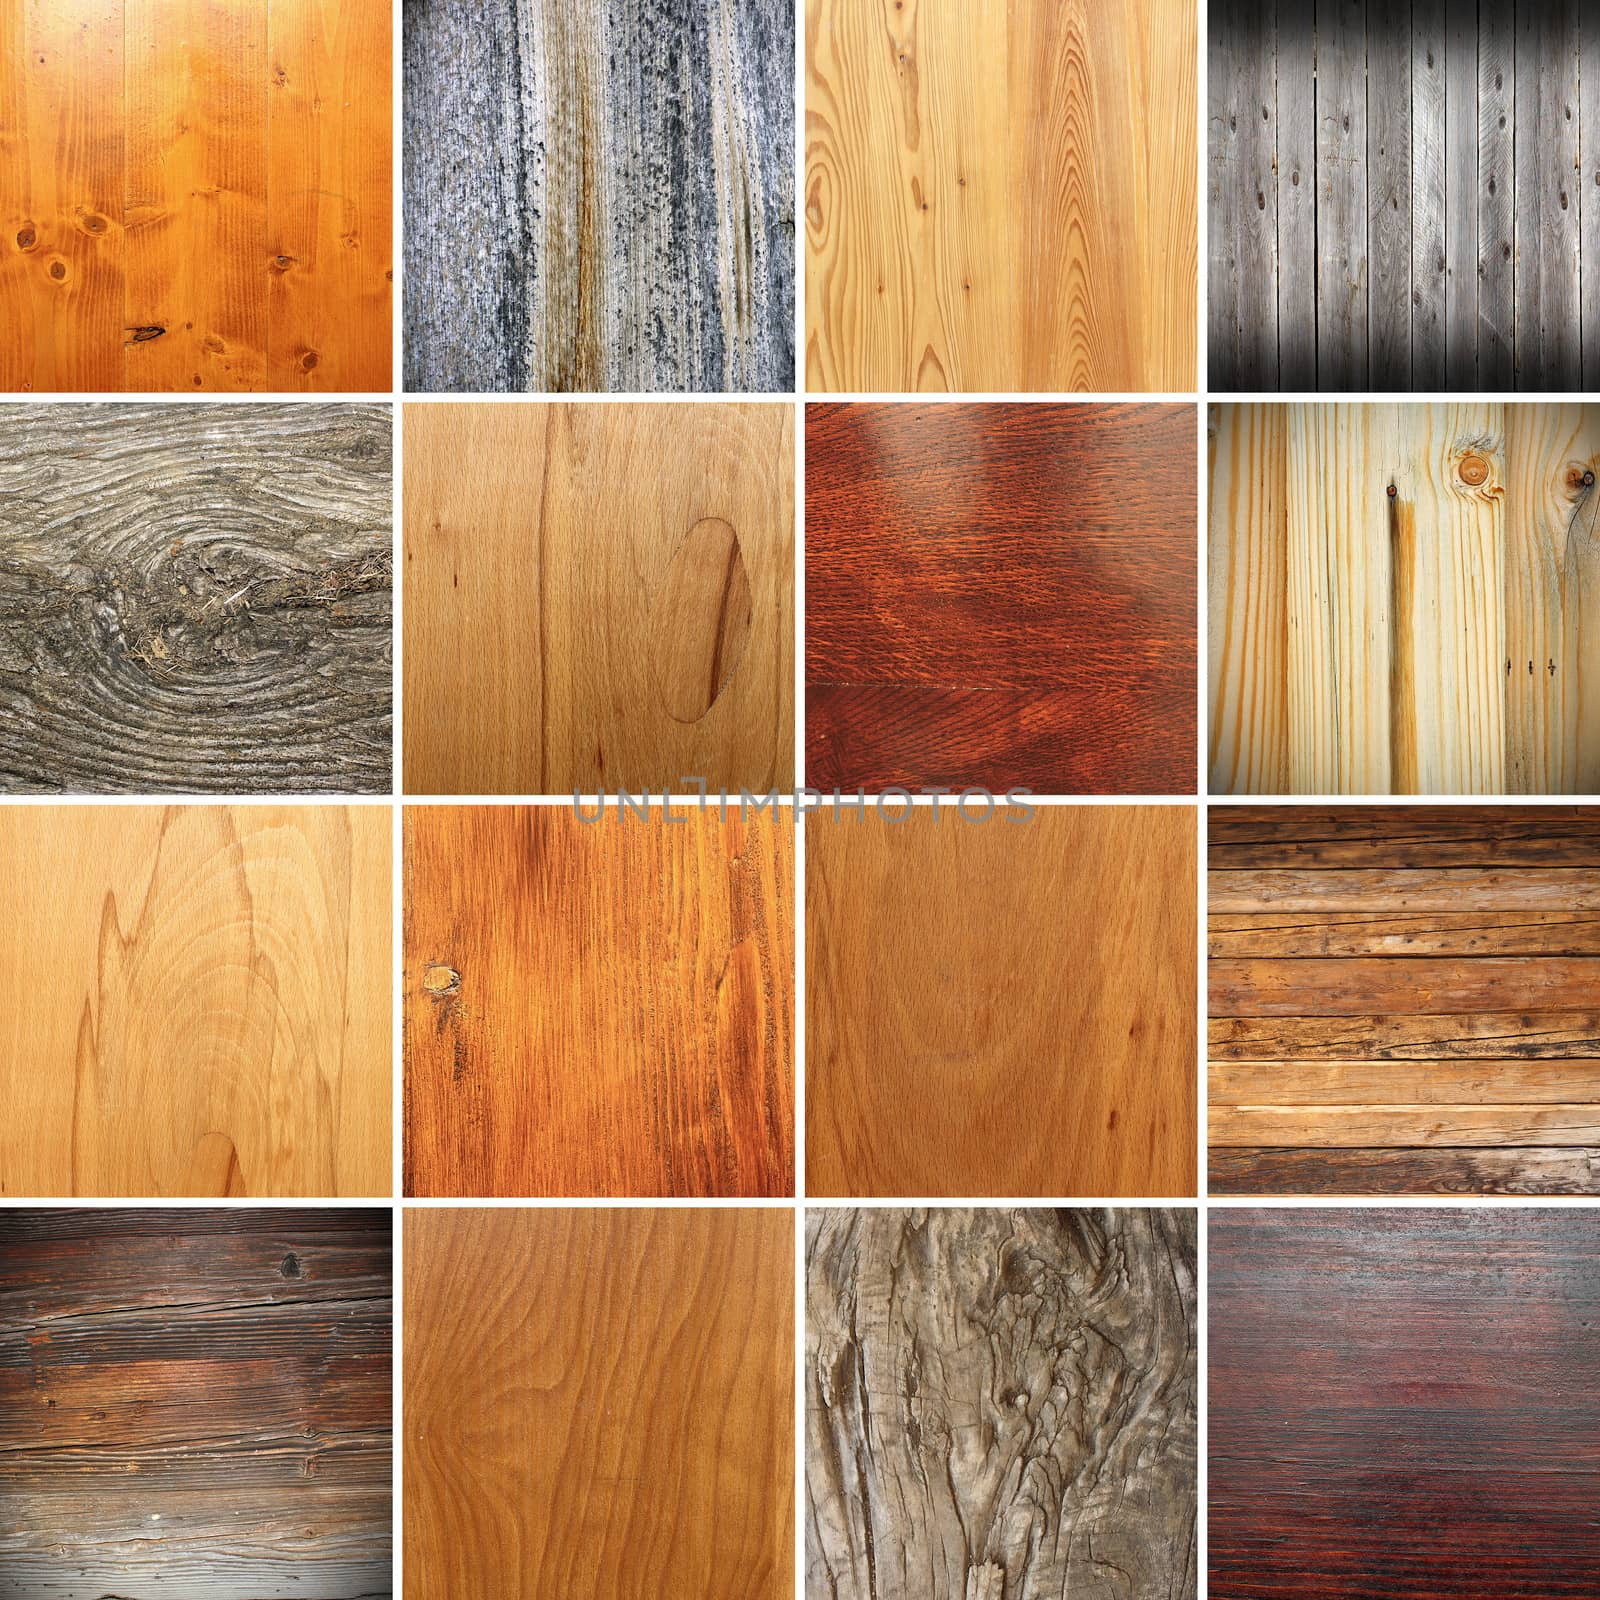 large collection of wooden textures to pick up in  your design